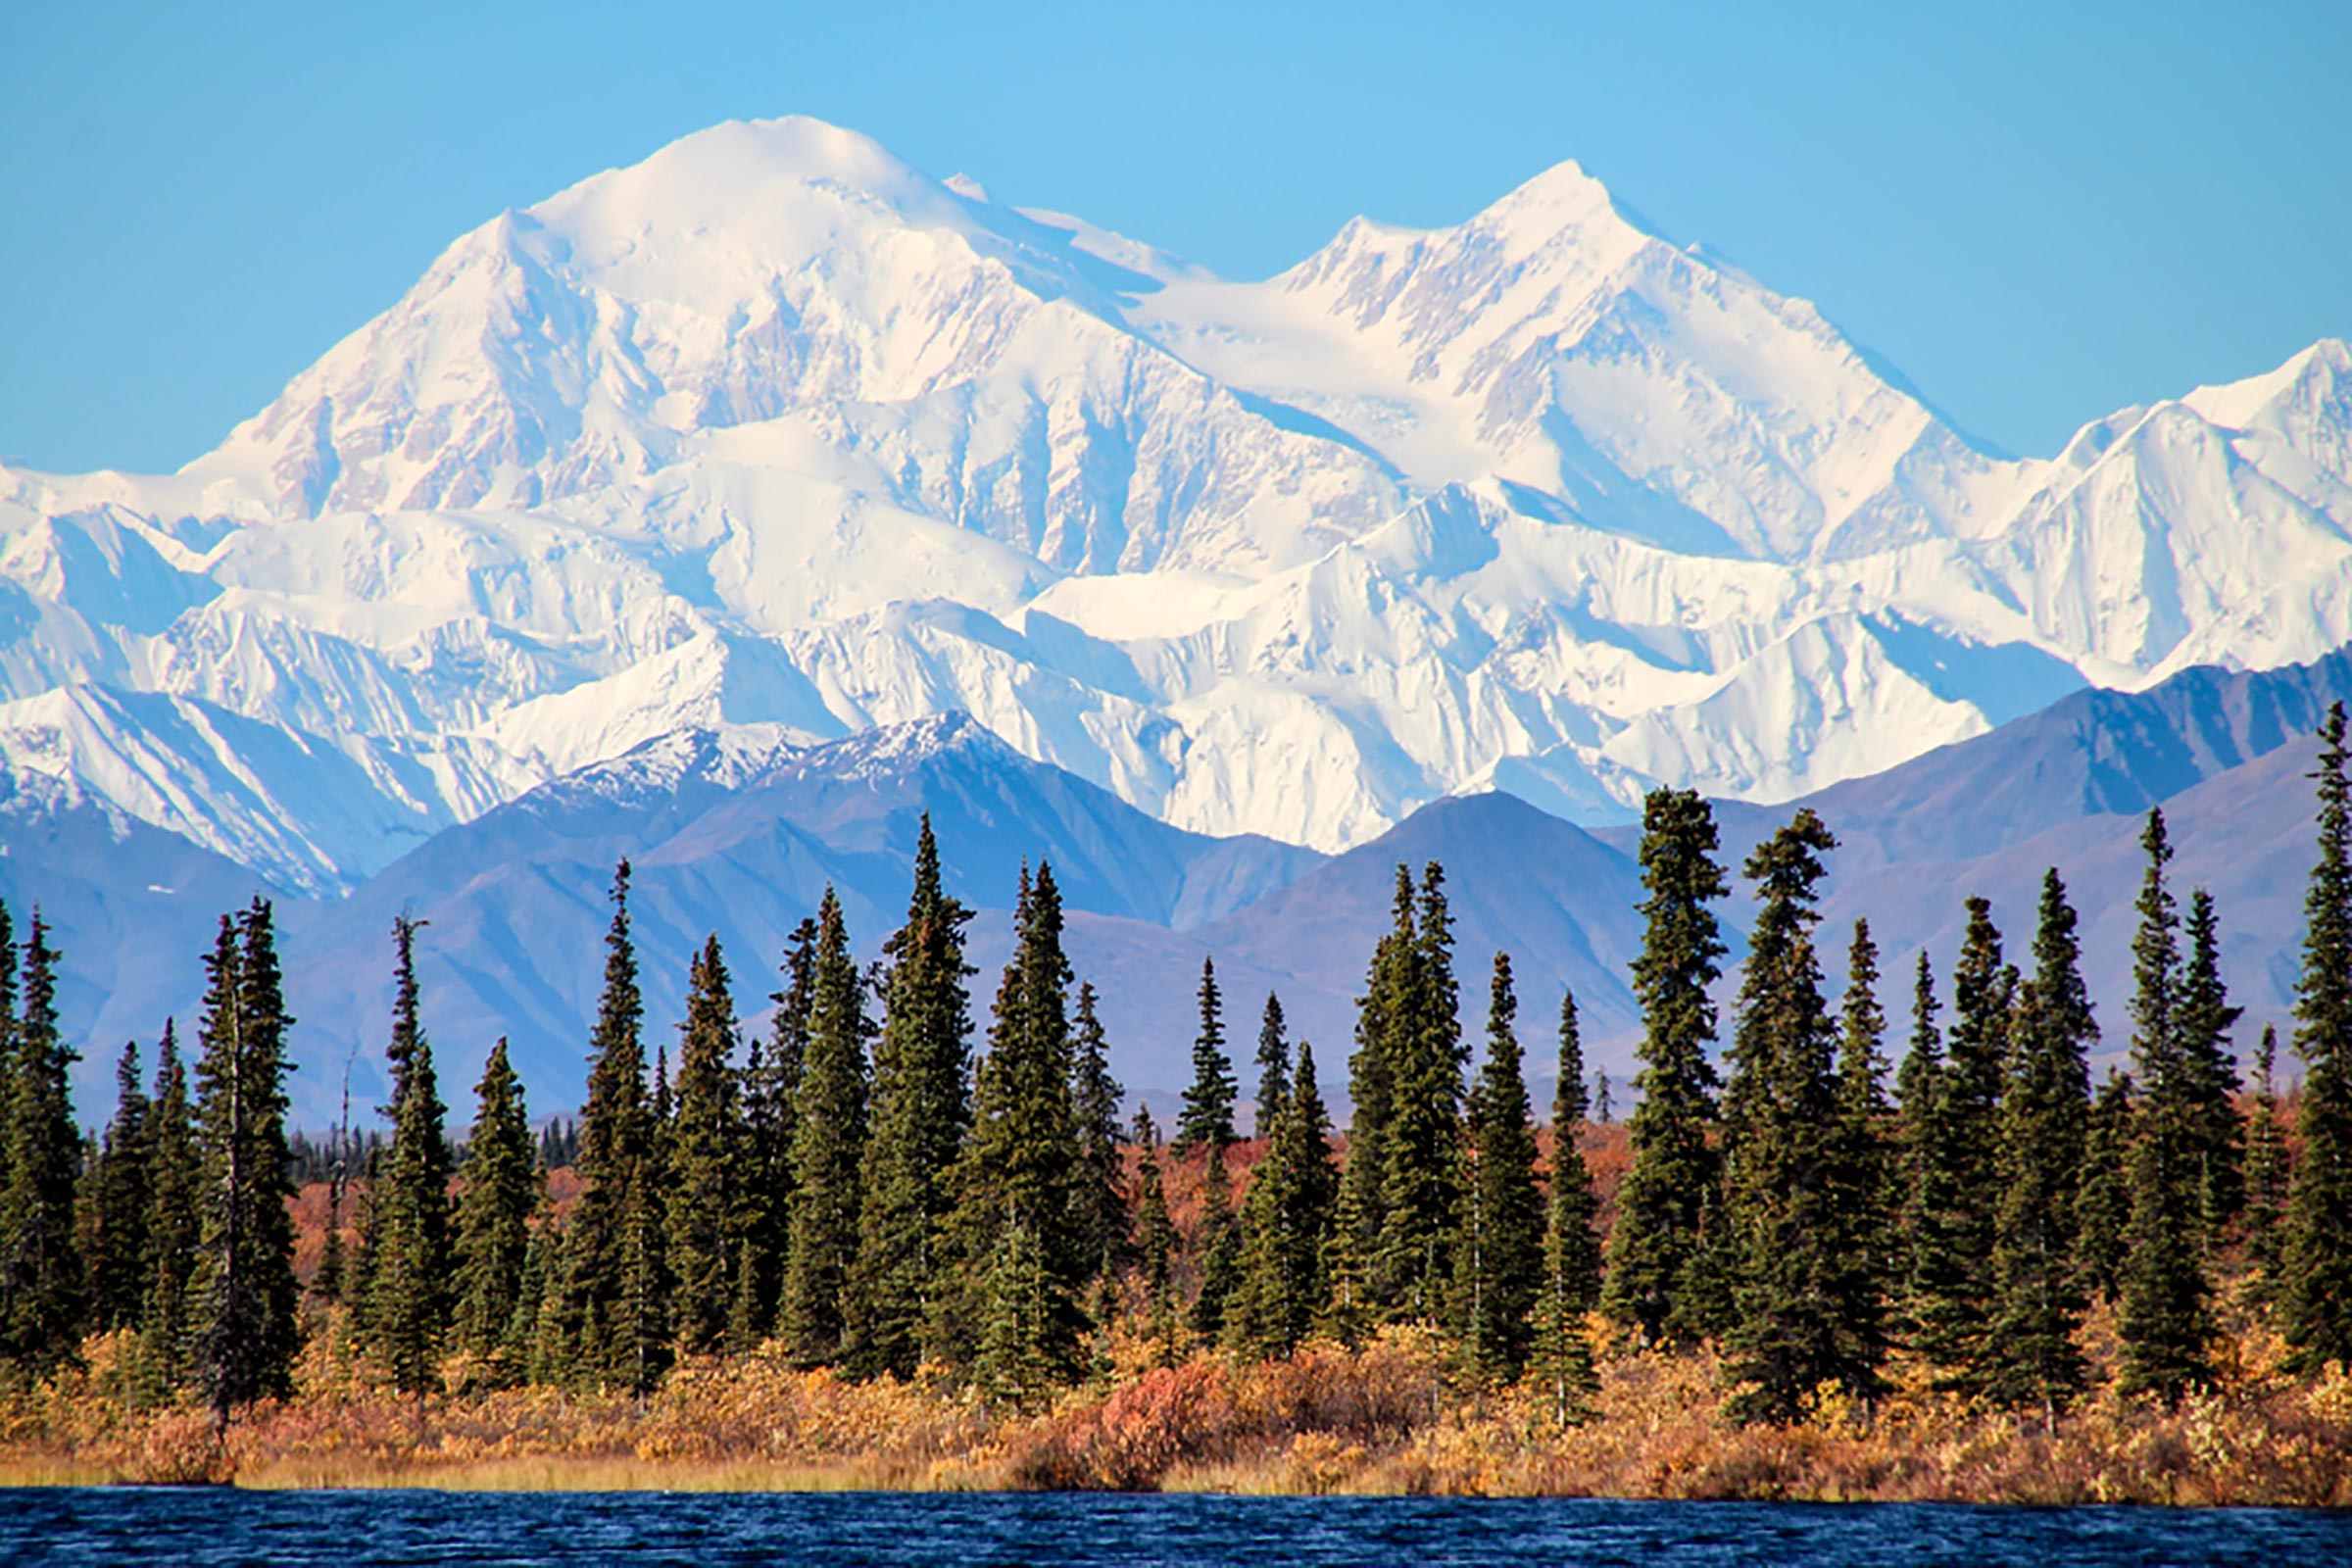 <p class="listicle-page__cta-button-shop"><a class="shop-btn" href="https://www.tripadvisor.com/Hotel_Review-s1-g143022-d145093-Reviews-Denali_Backcountry_Lodge-Denali_National_Park_and_Preserve_Alaska.html">Book Now</a></p> <p>Visit Denali National Park for fantastic mountain views and opportunities to see wildlife while there are still long hours of daylight. In early September, you may discover fall colors and even have a chance to see the northern lights. While in the park, enjoy a hike along the Savage River or let kids earn their Junior Ranger badge. Check out the Denali Backcountry Lodge or the Skyline Lodge for rustic accommodations. Of course, this area is also amazing in the colder months. Just take a look at these <a href="https://www.rd.com/list/photos-alaska-winter-wonderland/">16 photos that prove Alaska is a winter wonderland</a>.</p>